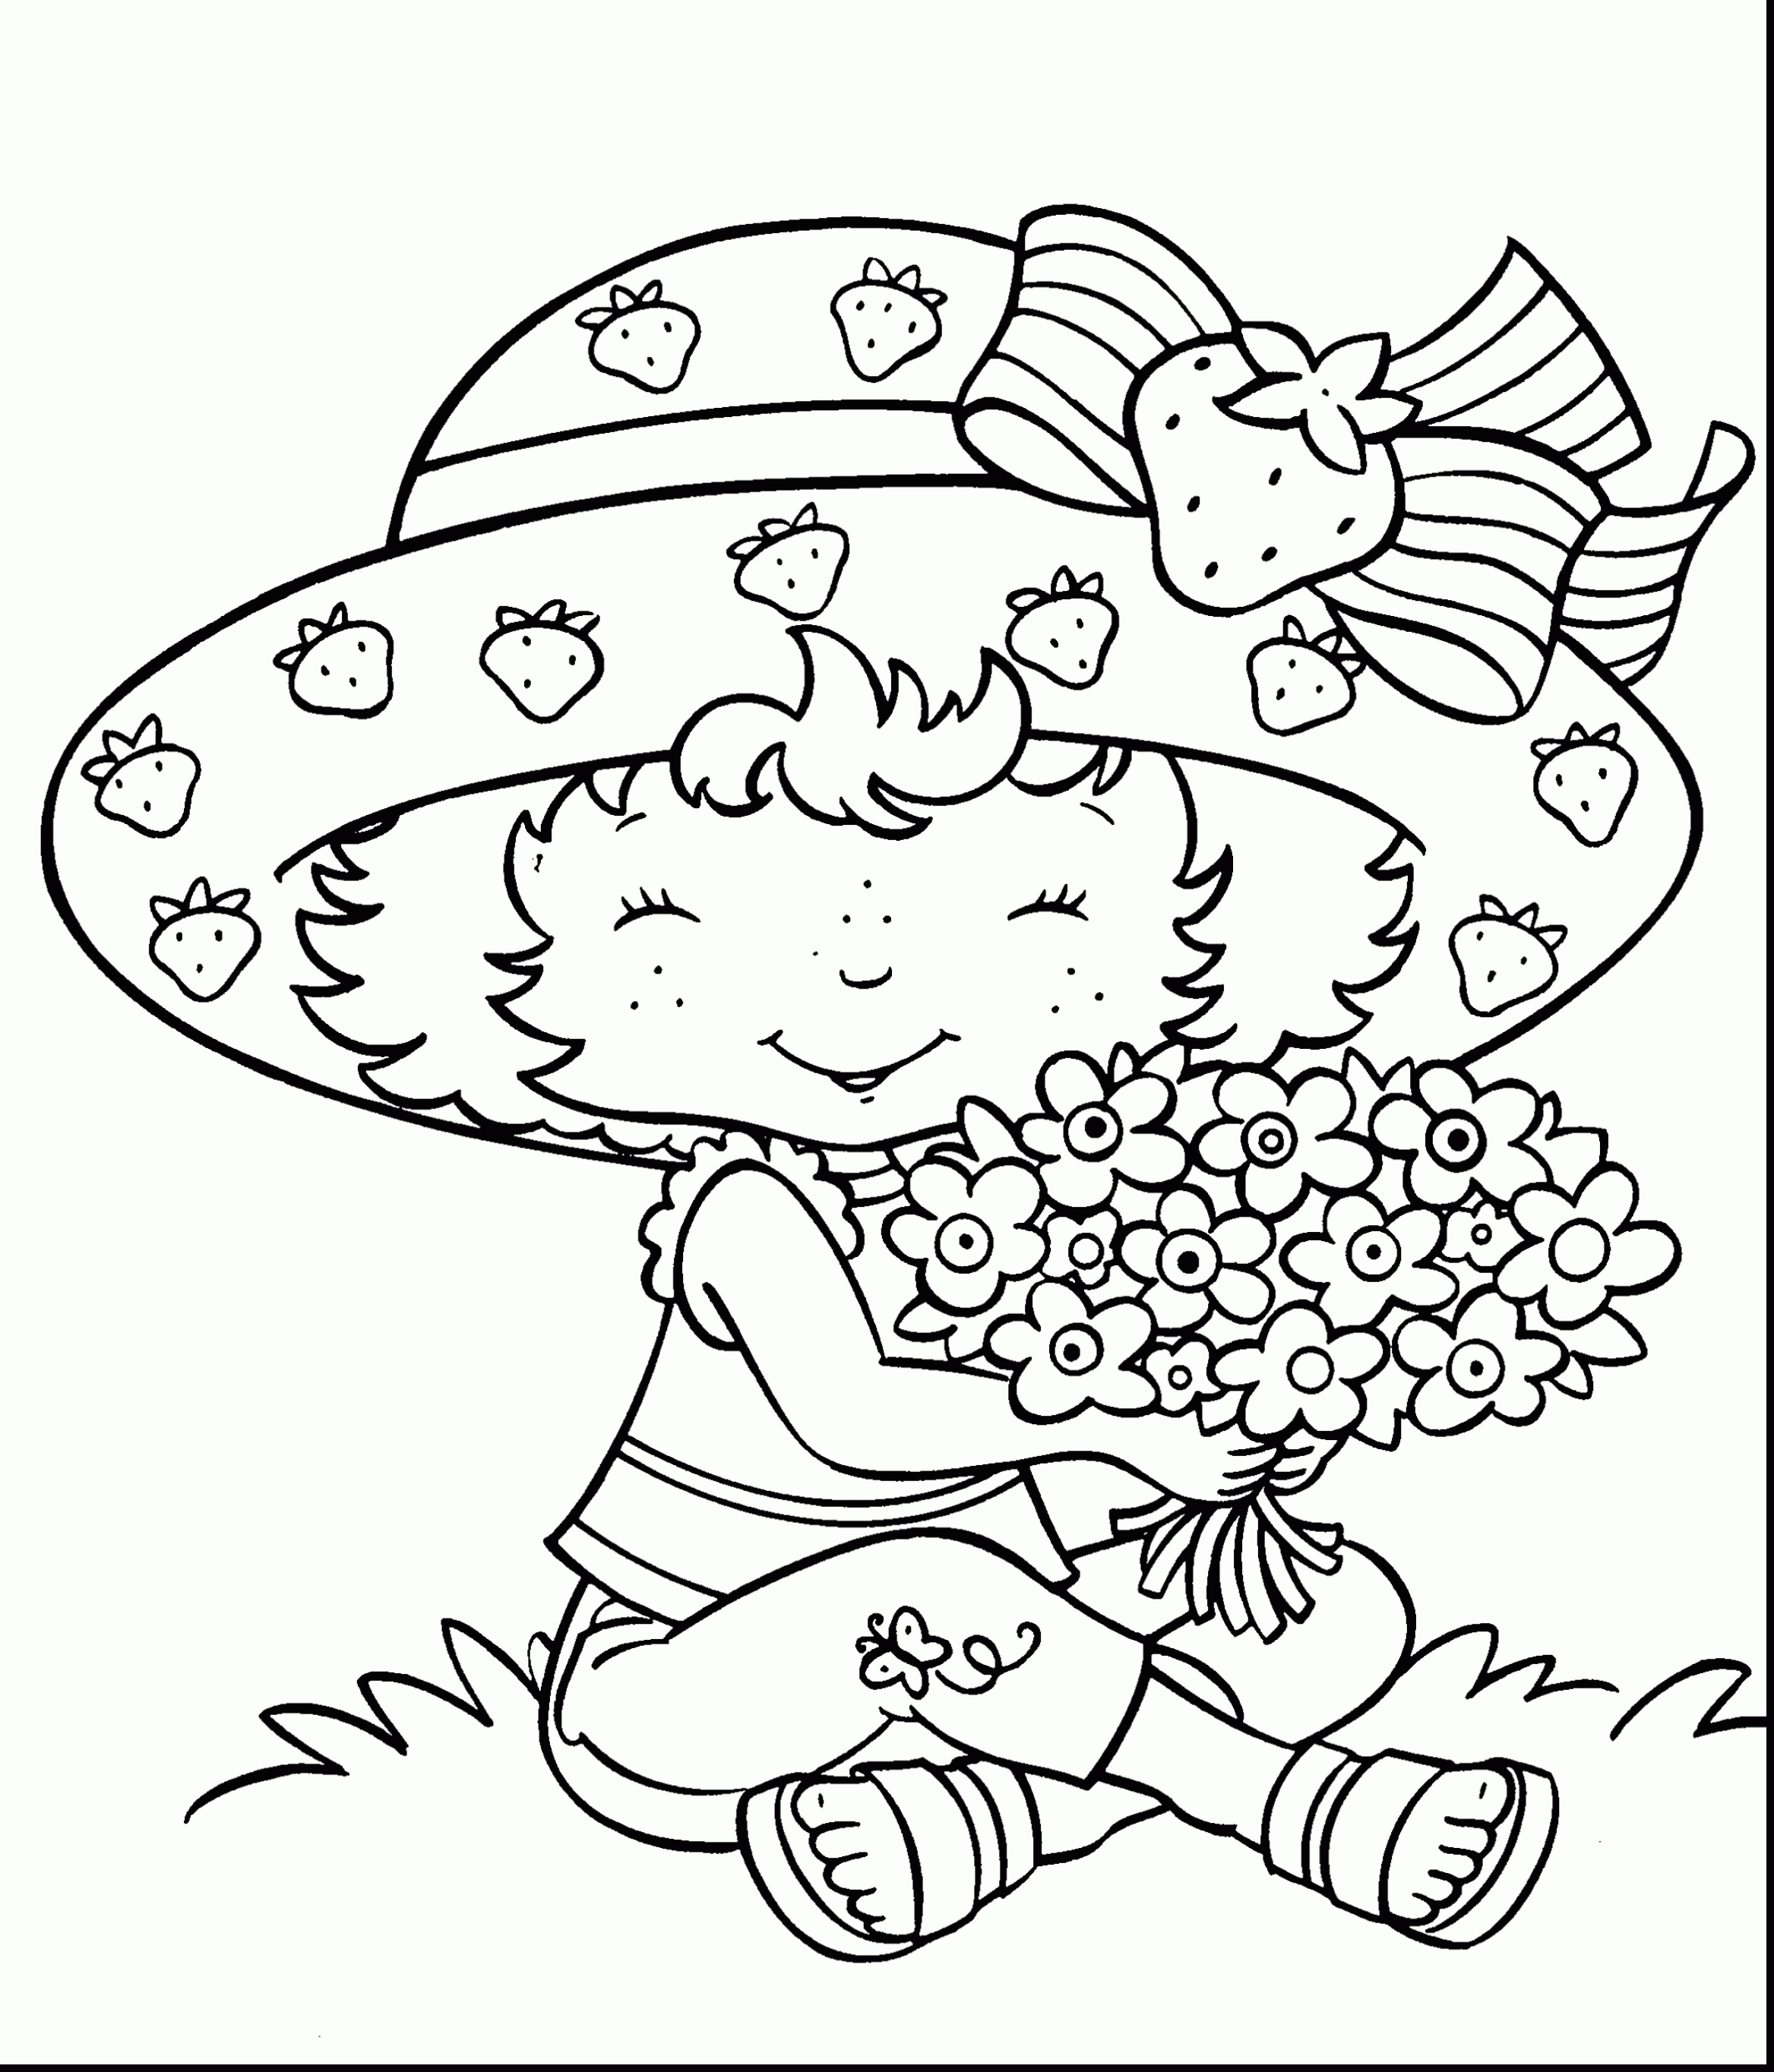 Bessie Coleman Coloring Page Collection Coloring Sheets For Girls Flowers Pictures Asesoriawebmx